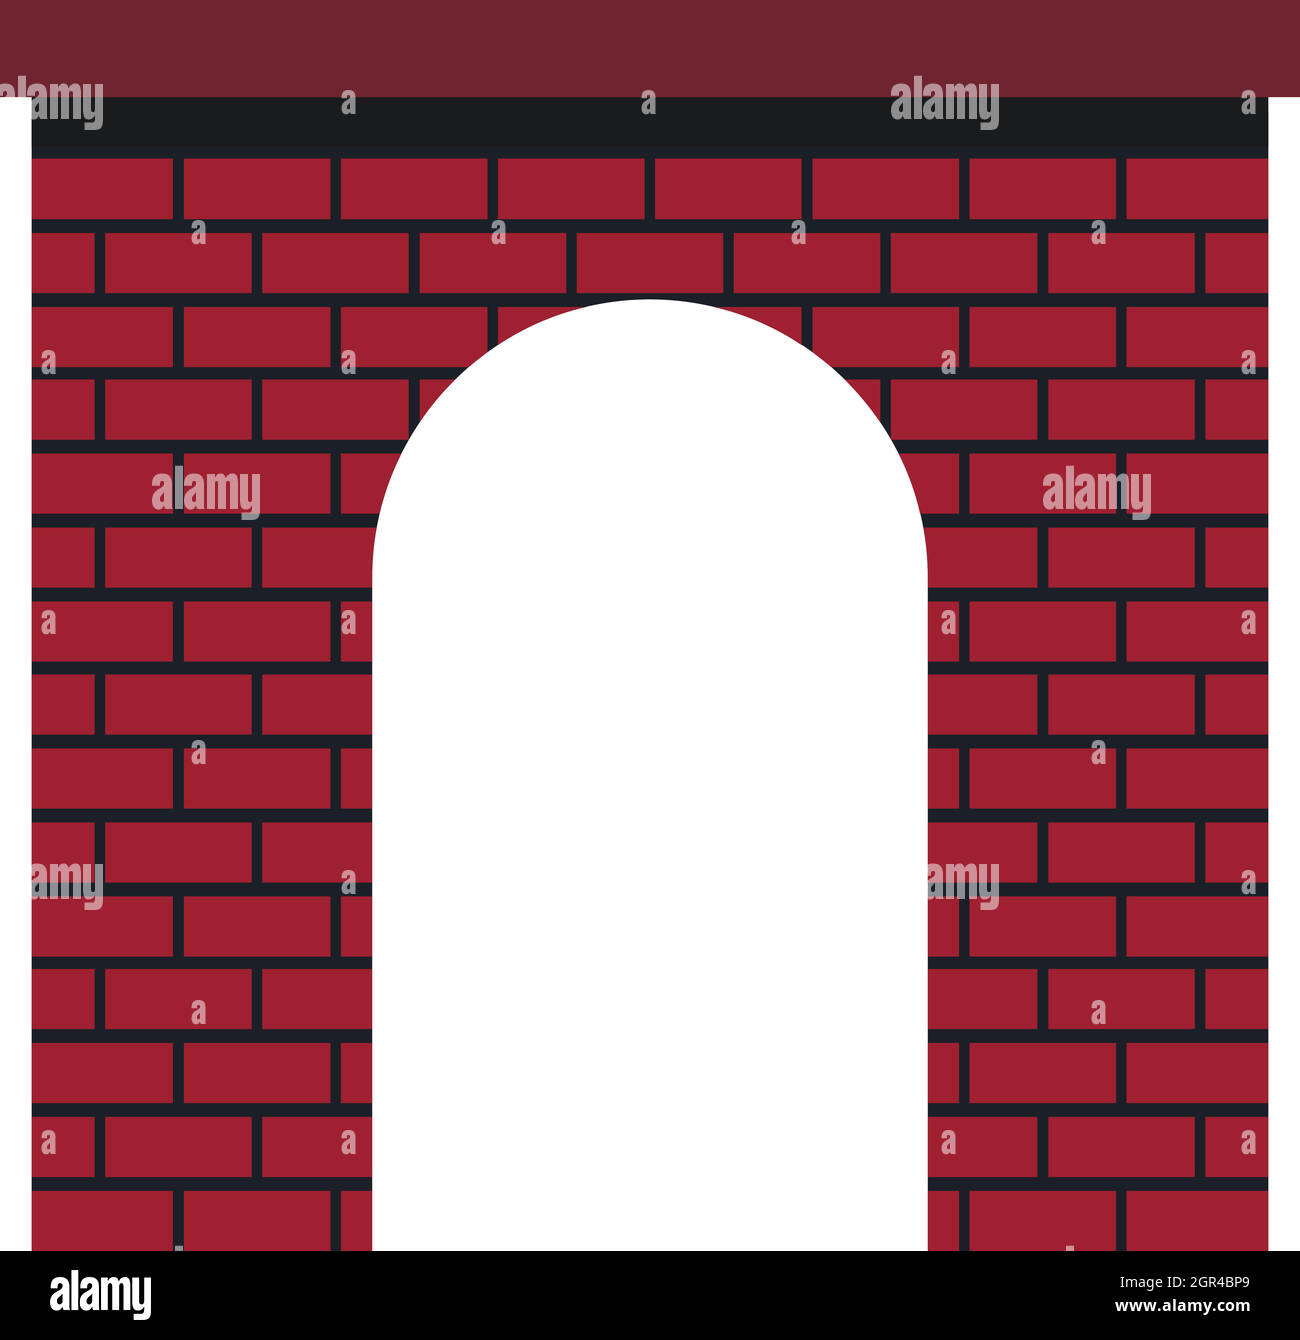 Arch architectural Stock Vector Images - Alamy